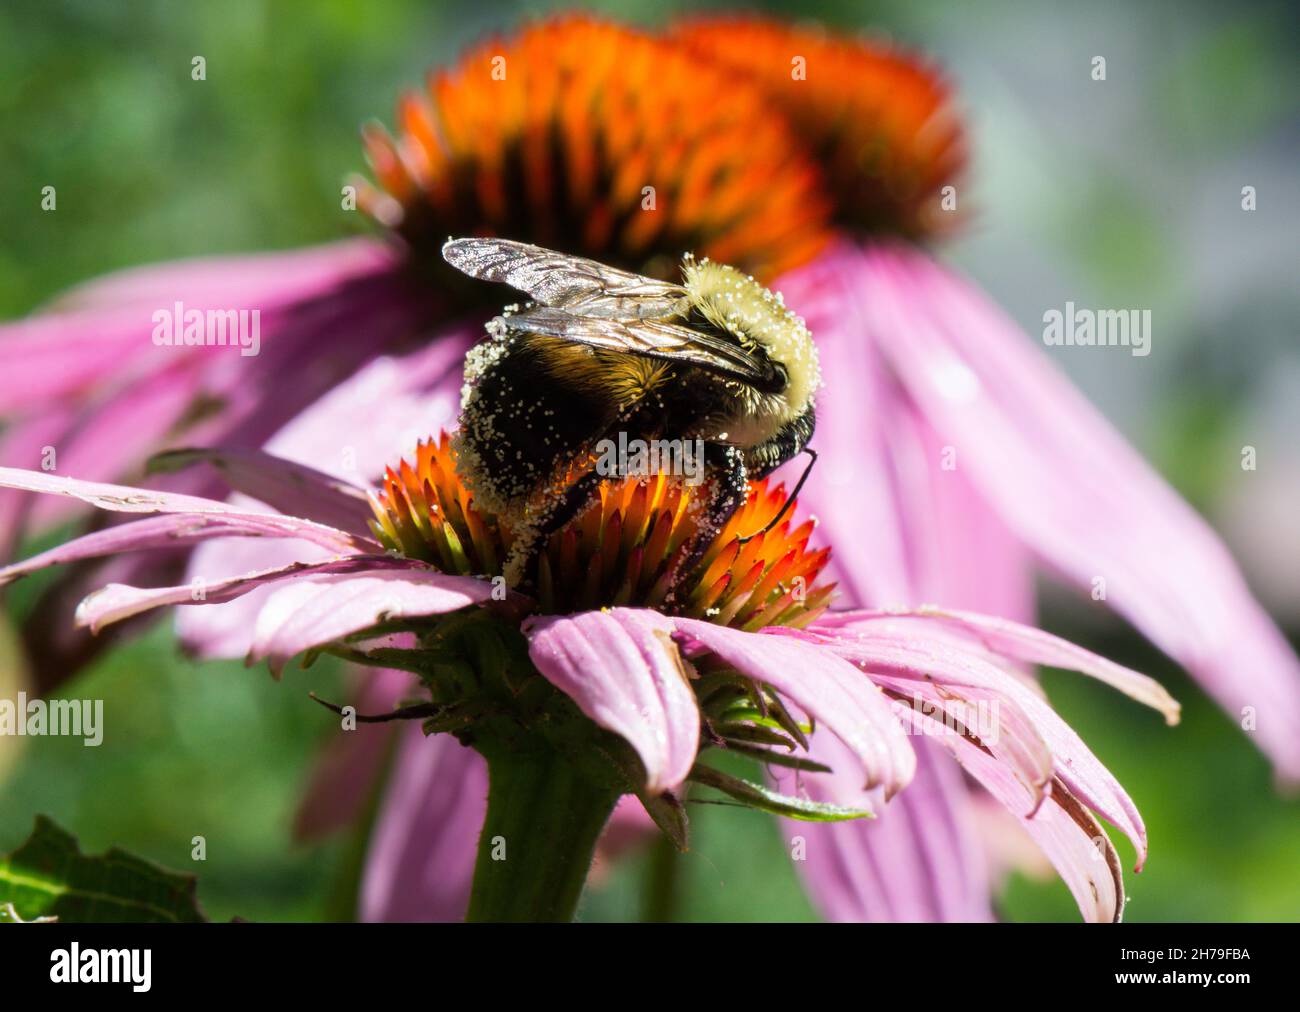 A bumblebee that has become covered in pollen while foraging on the open bloom of echinacea purpurea Stock Photo